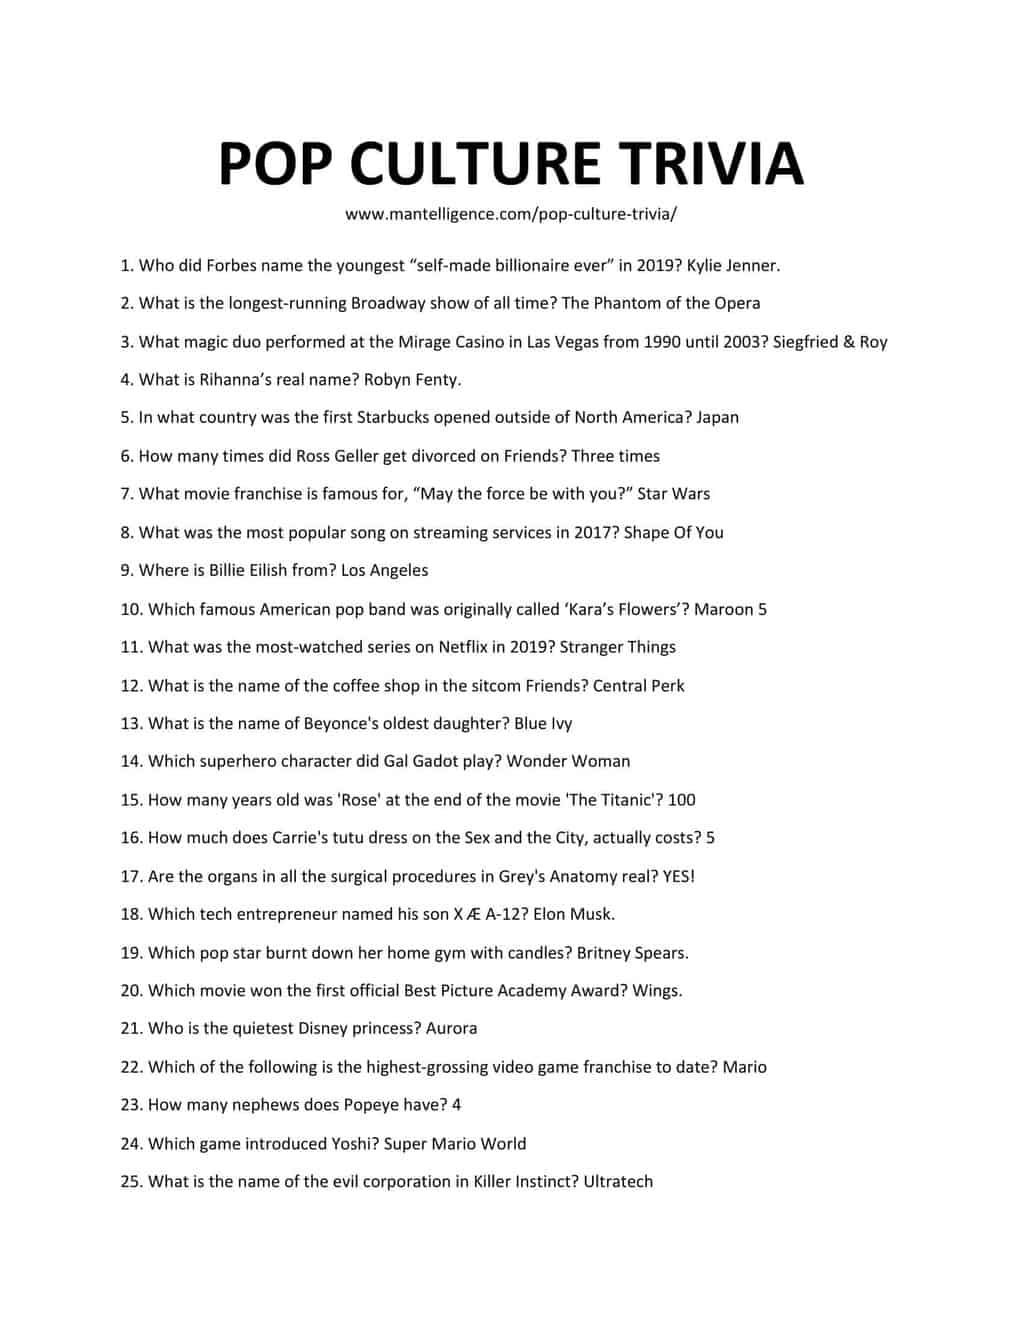 2010s-pop-culture-trivia-questions-and-answers-printable-challenge